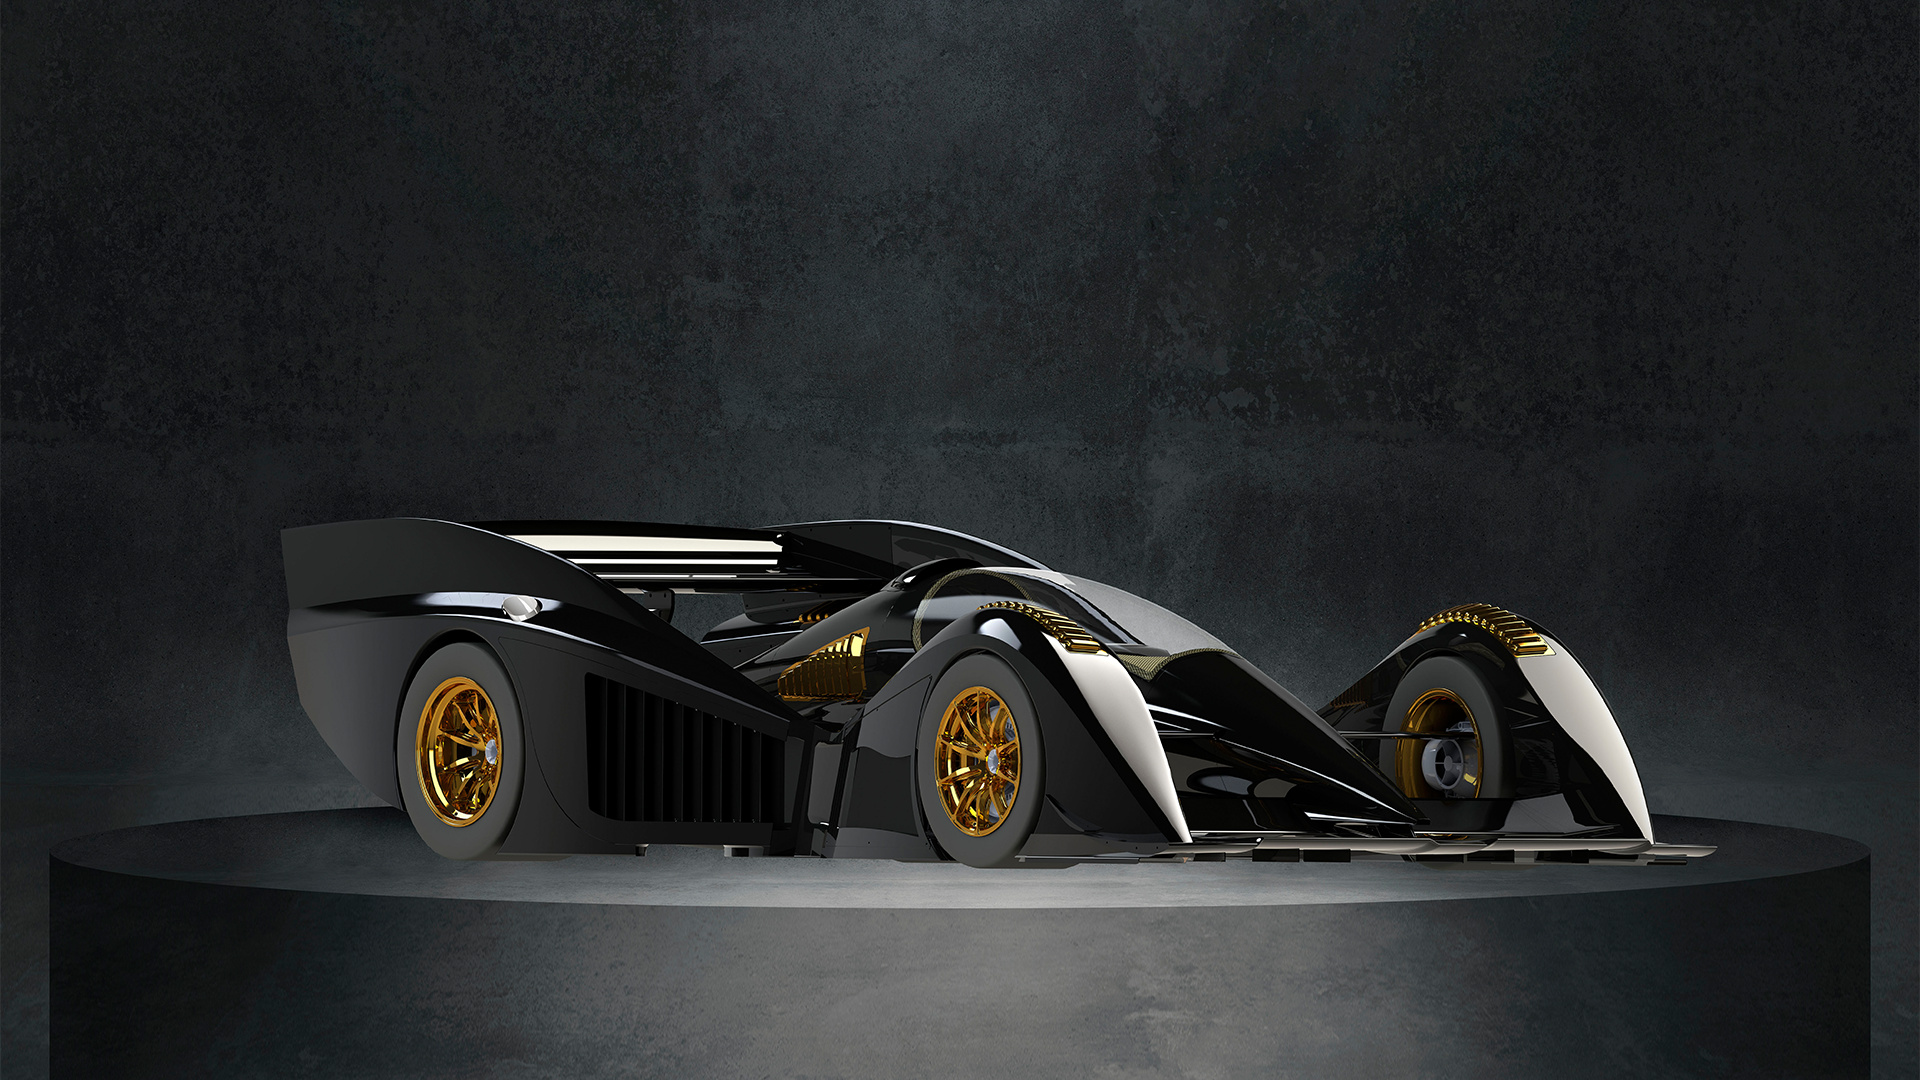 SMALL_Rodin_Cars_officially_announce_1200_HP_sub-700kg_track_hypercar_the_FZERO_is_coming_in_2023 (1)